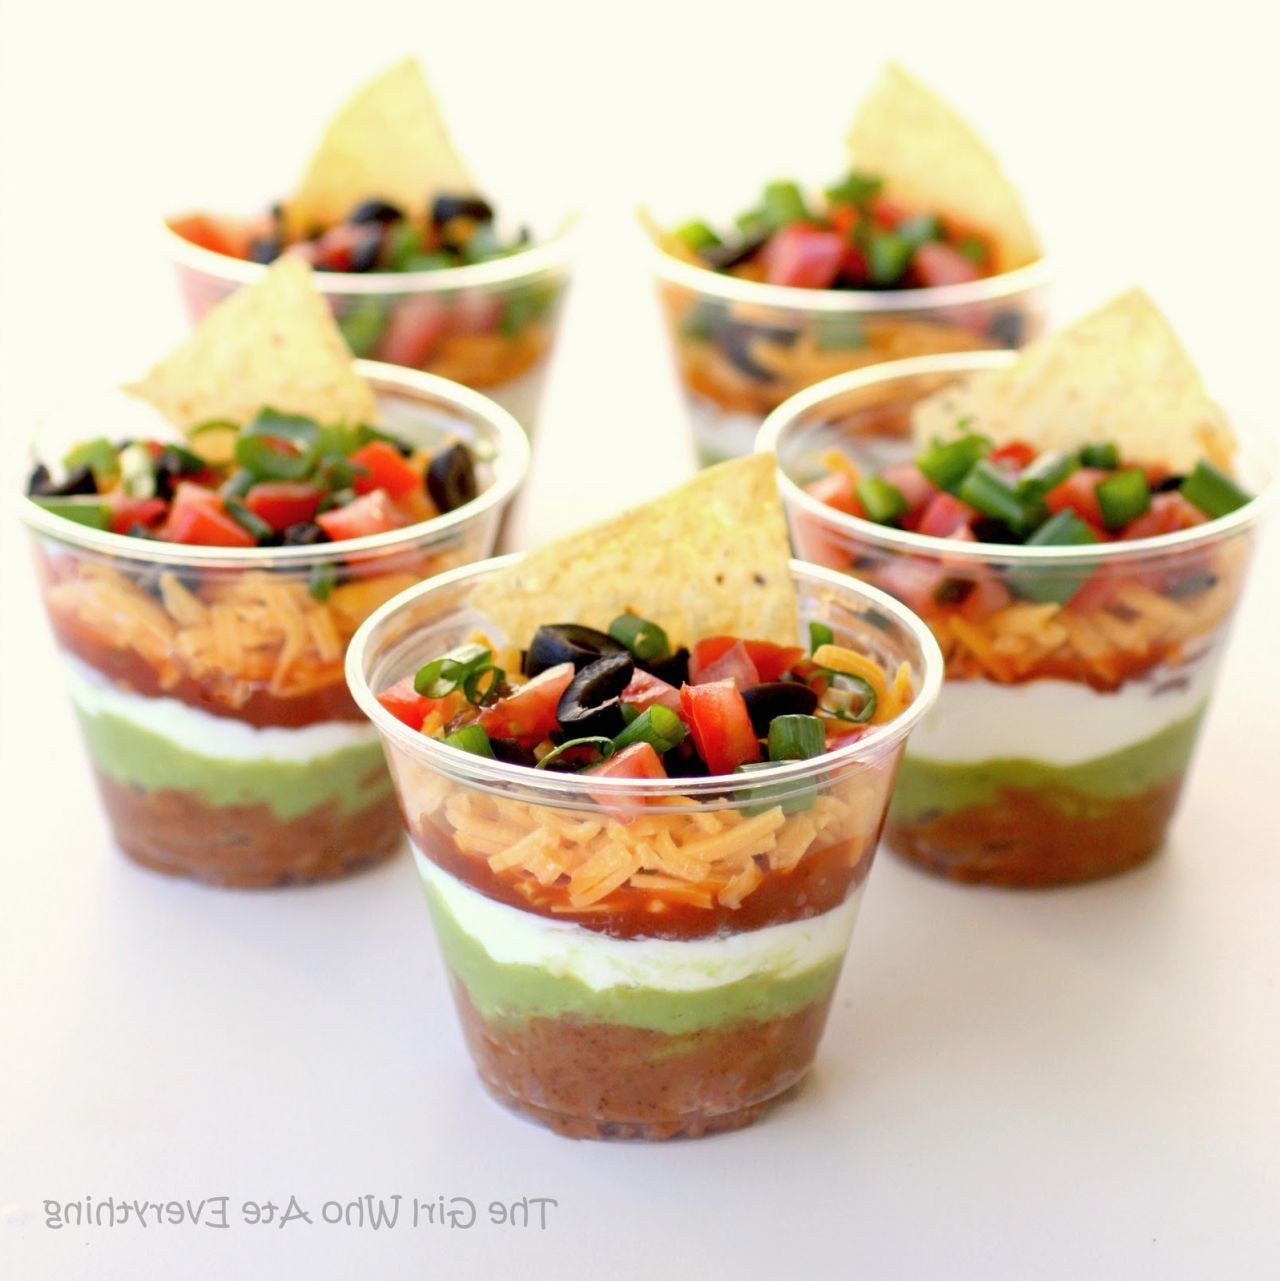 Inexpensive Graduation Party Food Ideas
 graduation party food ideas